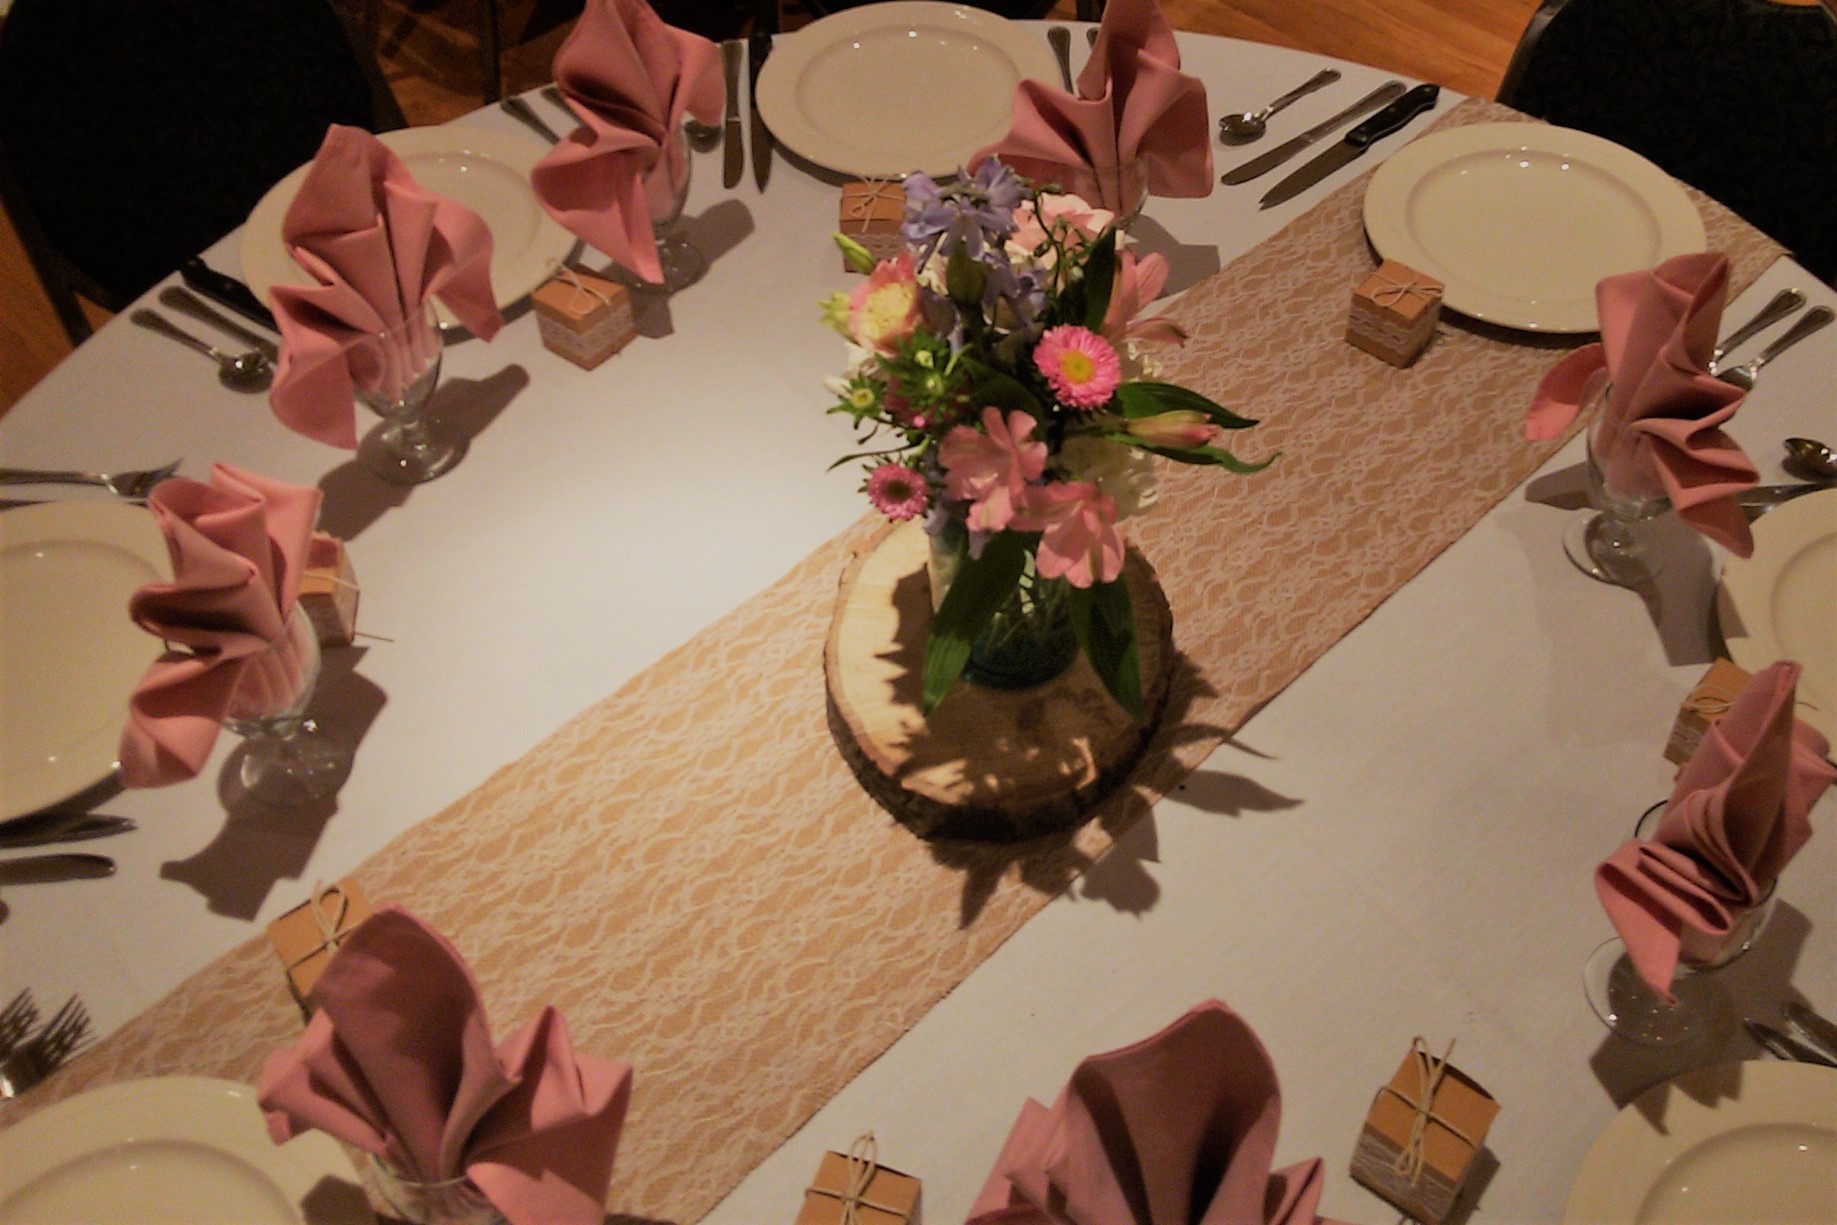 Table setting with wood plate, pink flowers and napkins, and lace runner.